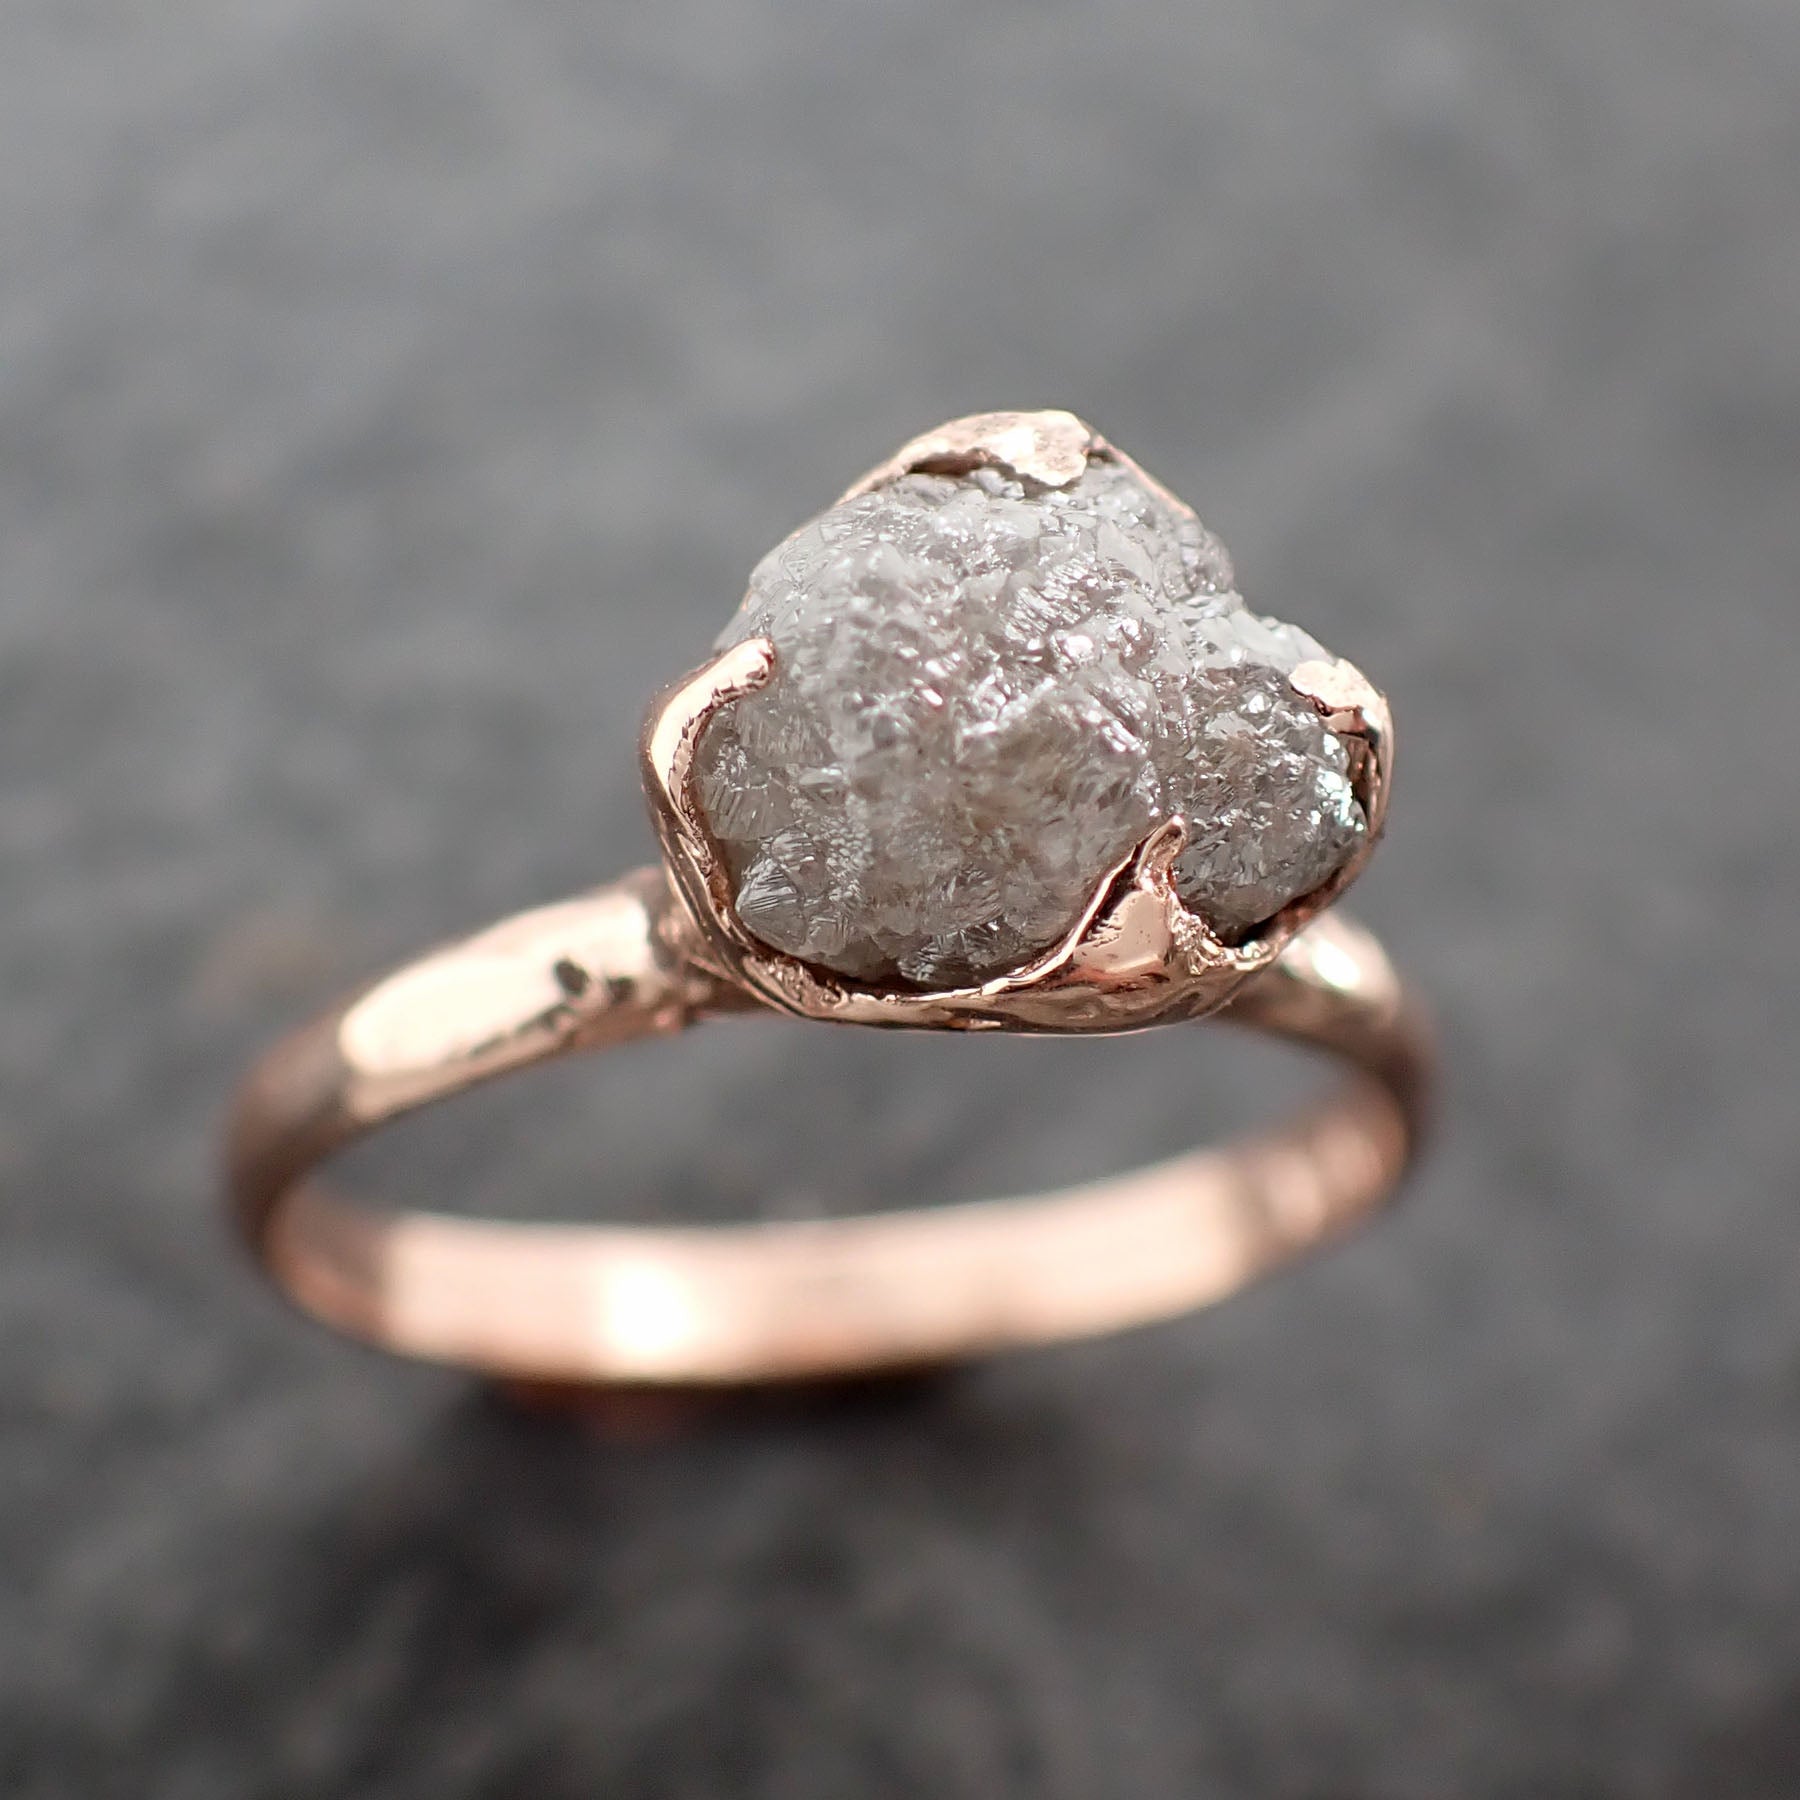 raw diamond solitaire engagement ring rough uncut rose gold conflict free diamond wedding promise 2548 Alternative Engagement